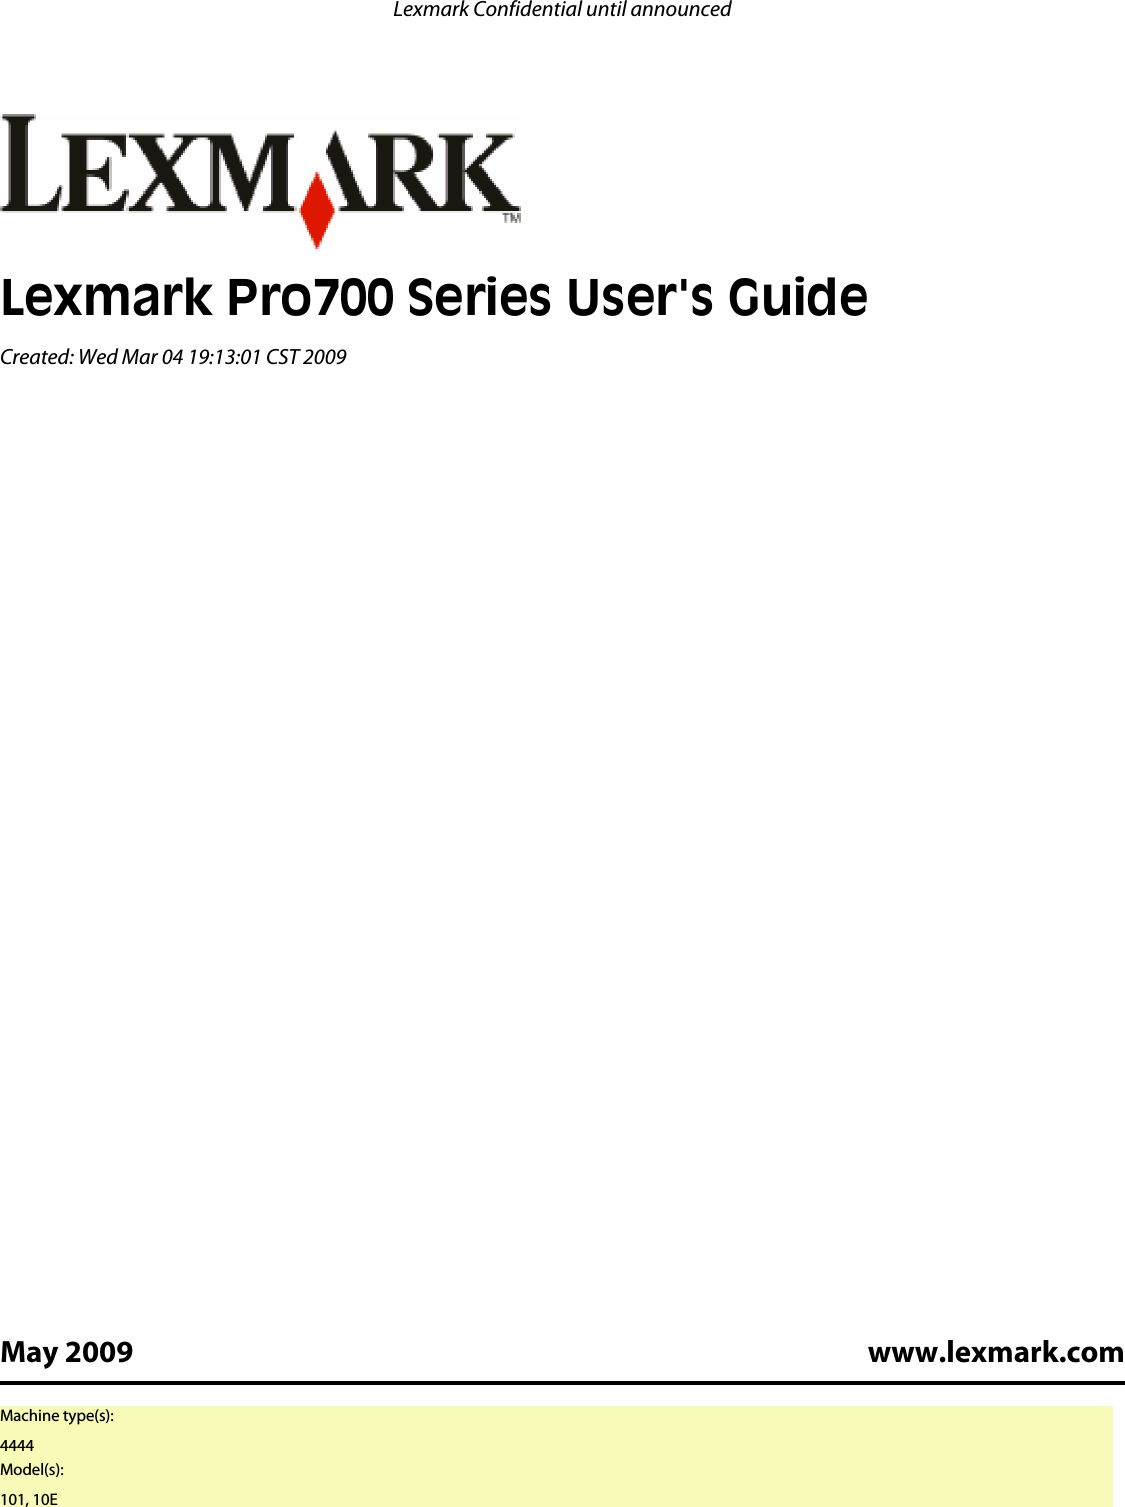 Lexmark Pro700 Series User&apos;s GuideCreated: Wed Mar 04 19:13:01 CST 2009May 2009 www.lexmark.comLexmark Confidential until announcedMachine type(s):4444Model(s):101, 10E